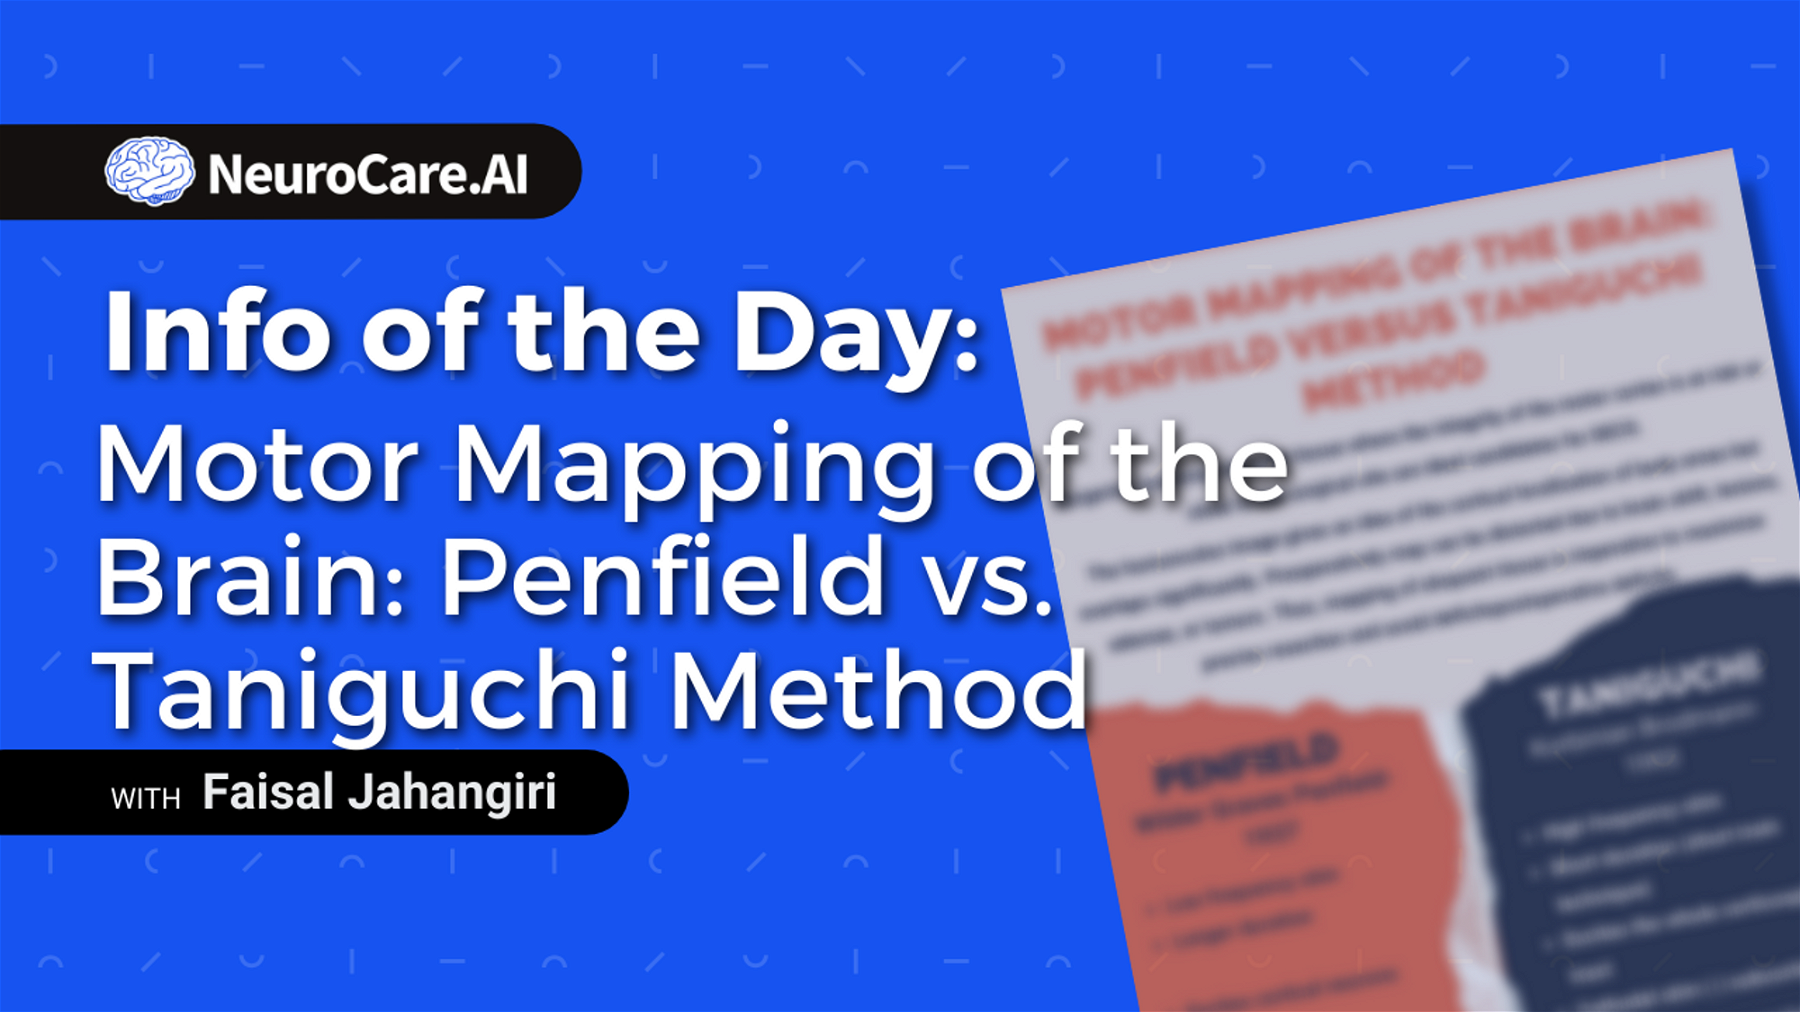 Info of the Day: "Motor Mapping of the Brain: Penfield vs. Taniguchi Method"